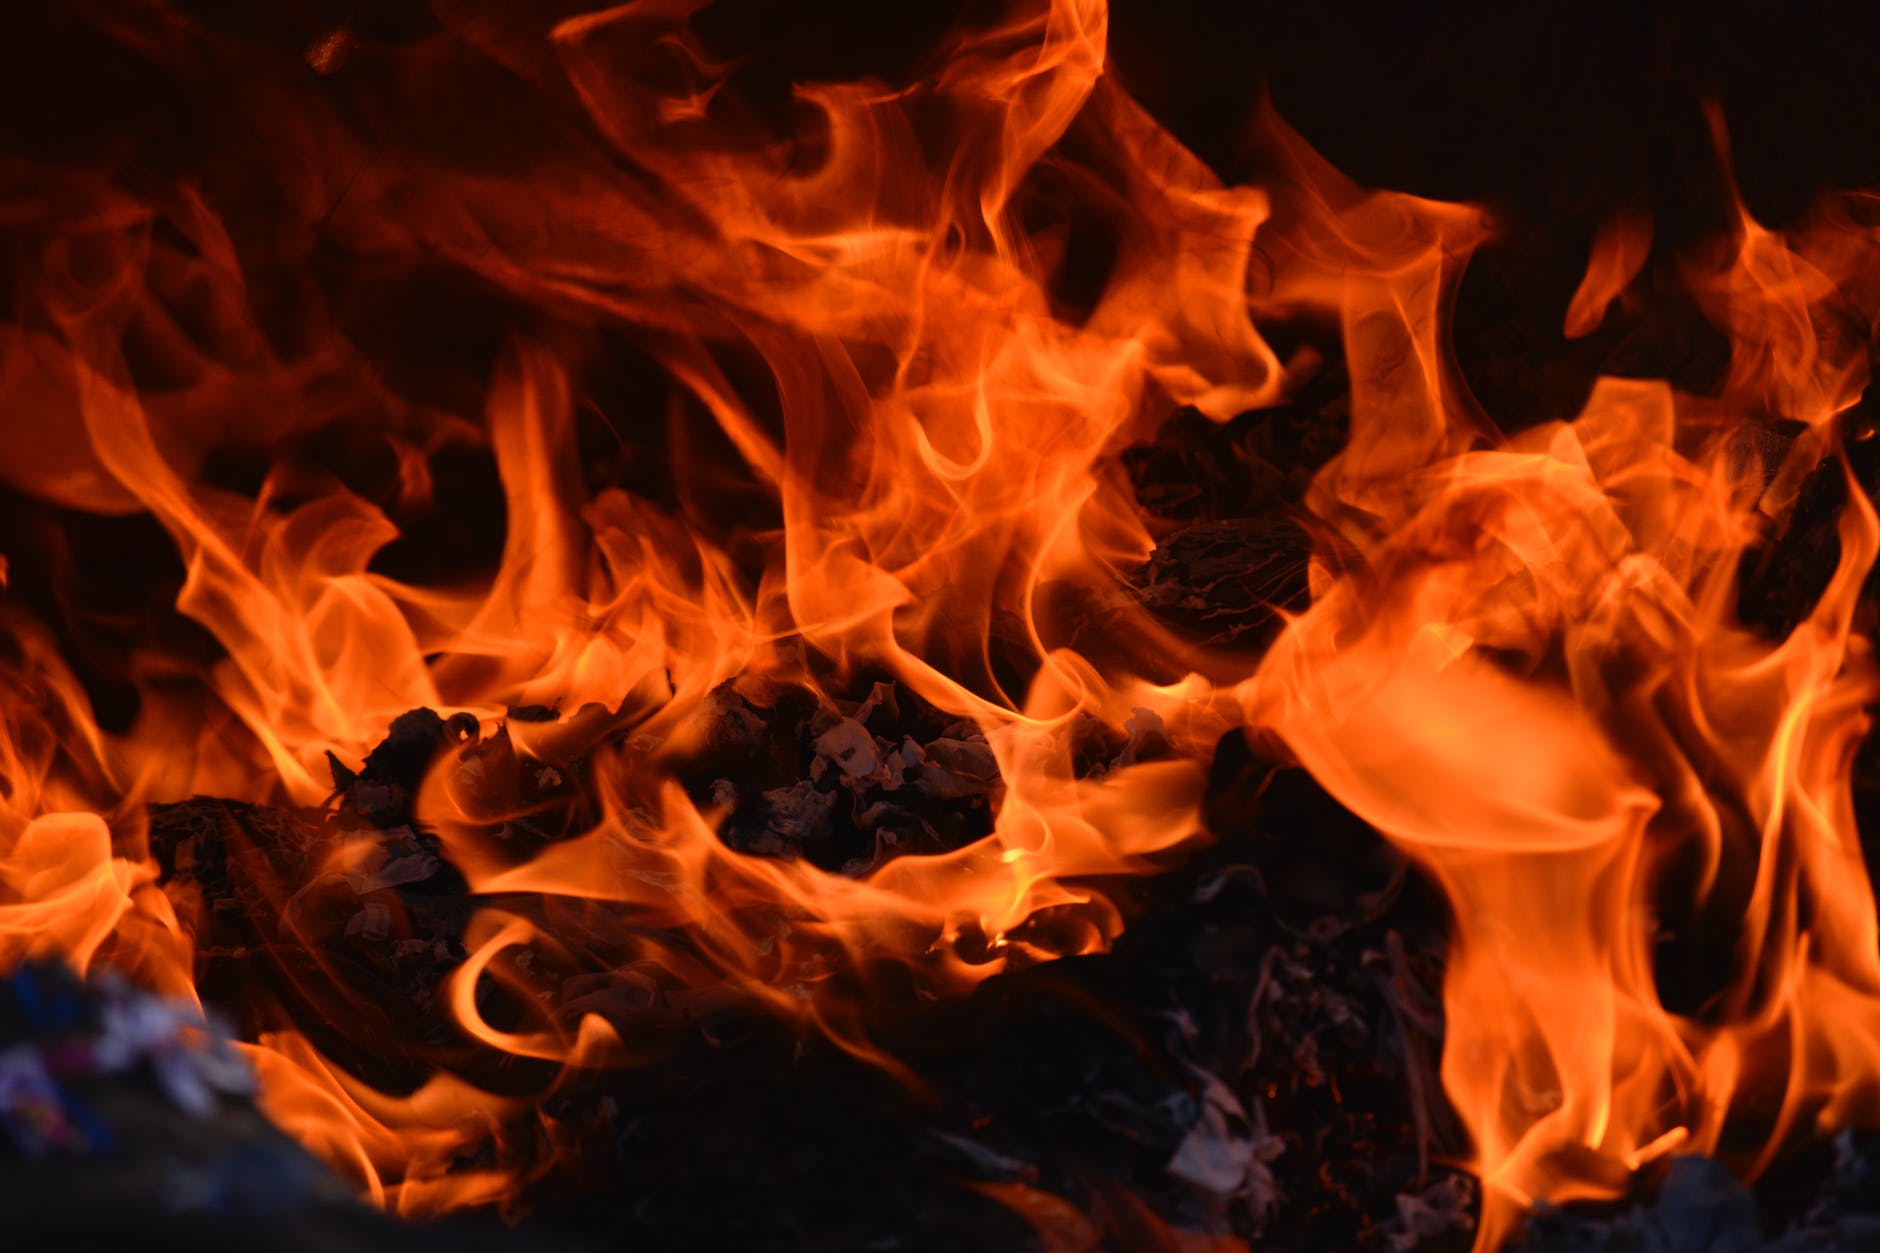 flames in close up view